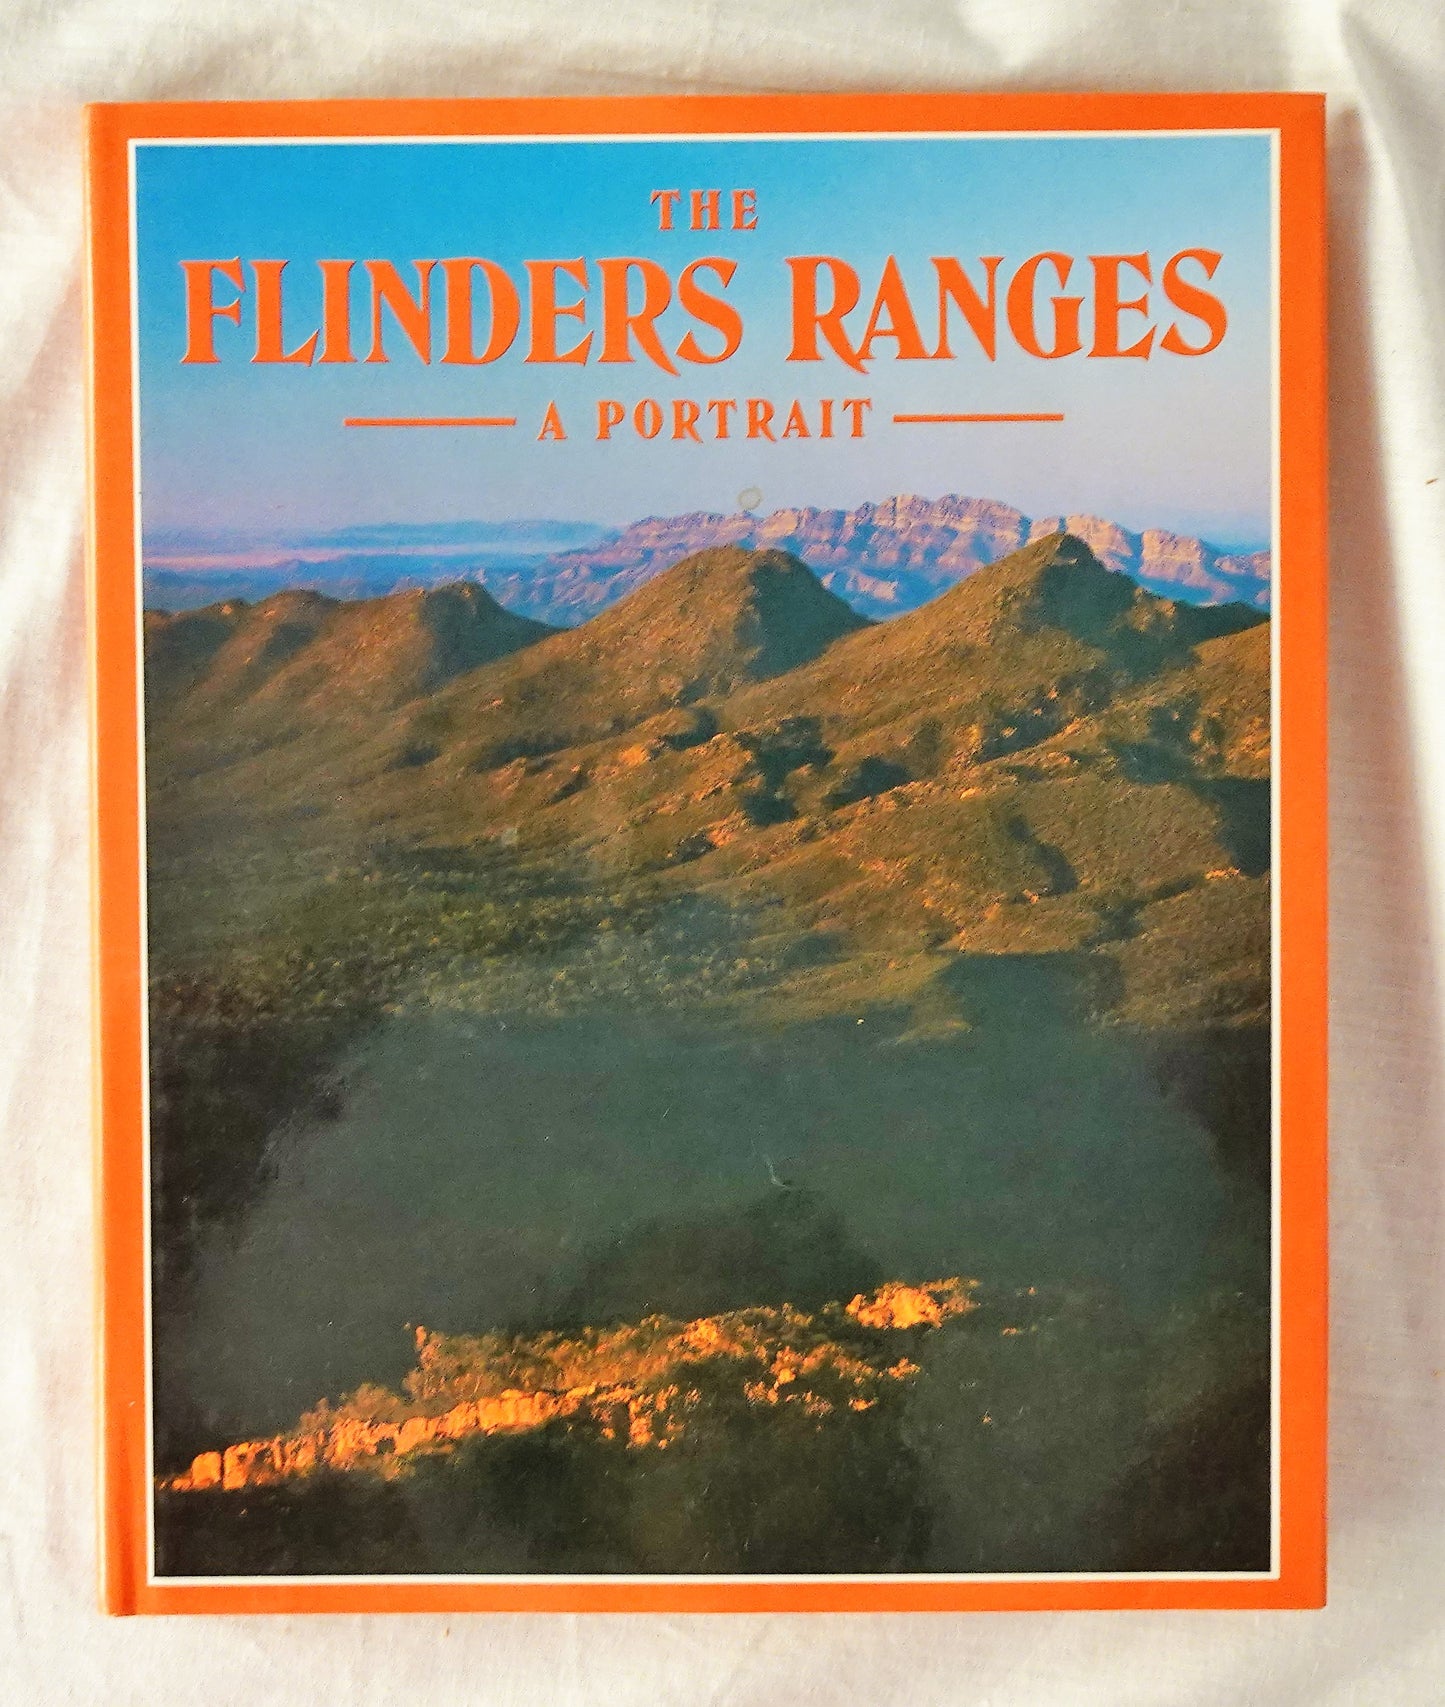 The Flinders Ranges  A Portrait  Photography by Eduard R. Domin  Text by Hans Mincham, Robert Swinbourne and Jean Cook